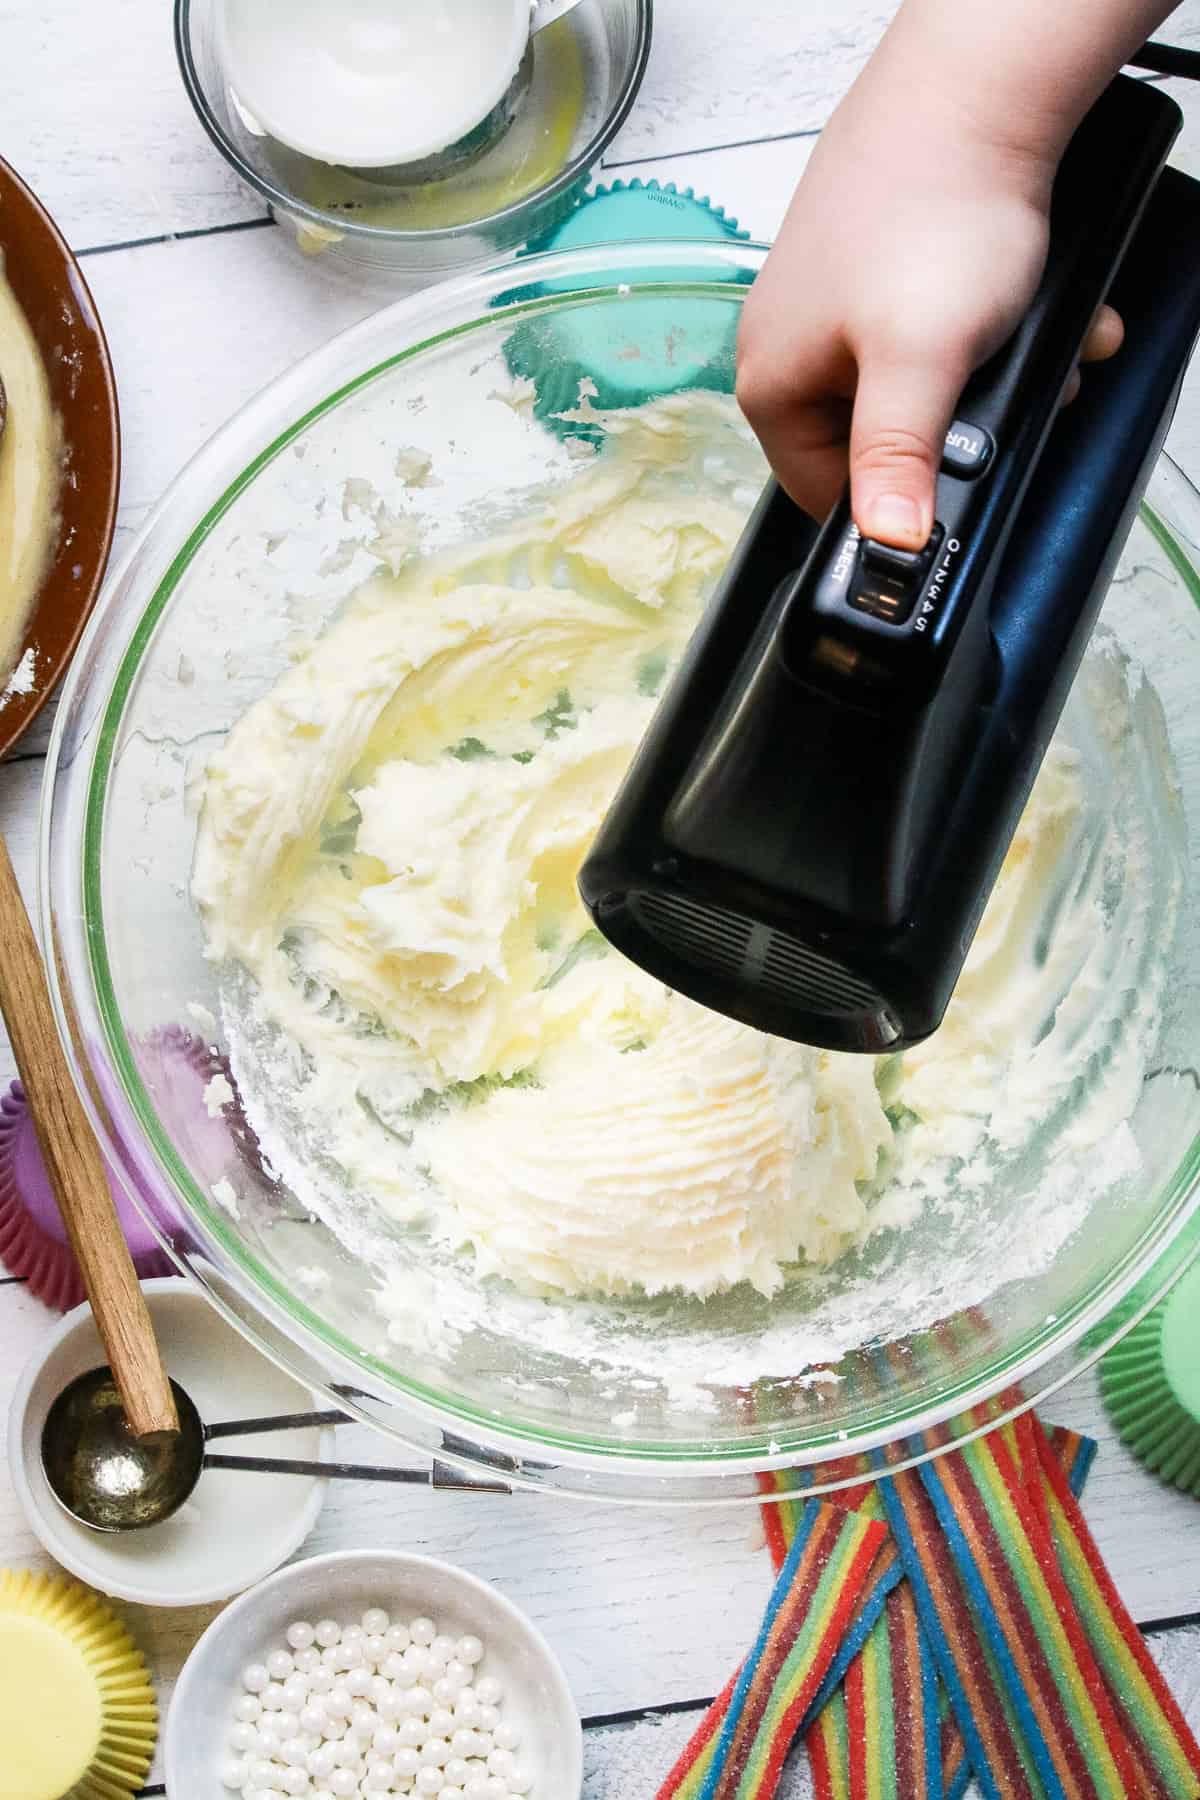 Prepare the buttercream frosting. Add two sticks of softened butter into a large bowl. Sift four cups of powdered sugar on top of the butter. Using a hand mixer on low speed.